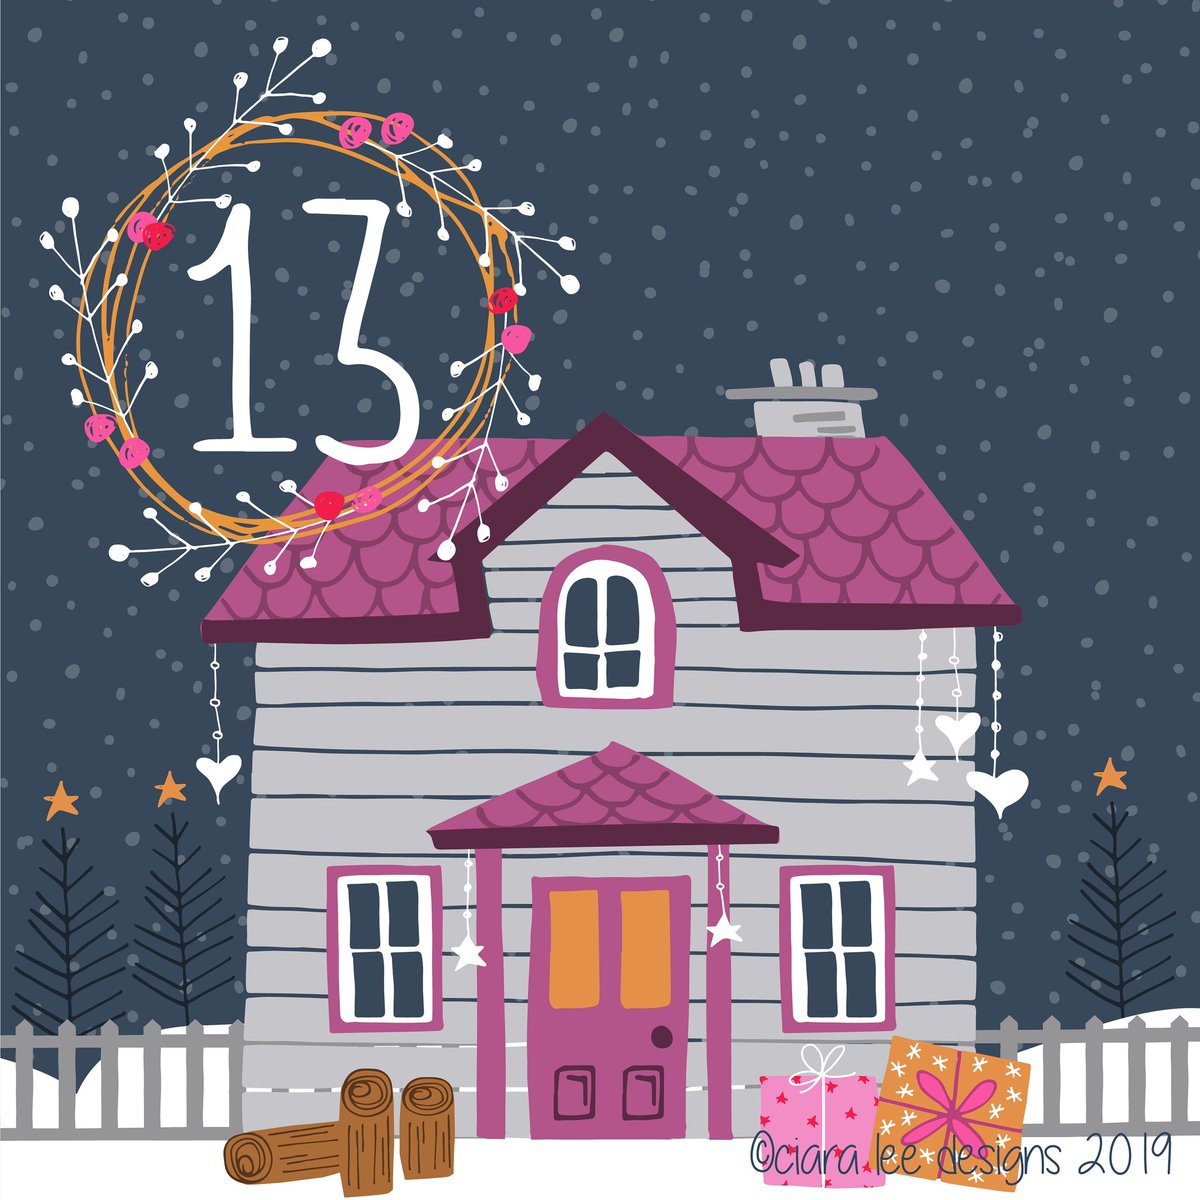 Day 13, we won't mention what weekday it is!

#christmascountdown #adventcalendar #christmasillustration #handdrawn #festive #december #makeitindesign #staycolorfullycreative #surfacepatternlife #patternobserver #surfacedesign #surfaceillustration #cozy #cozyhome